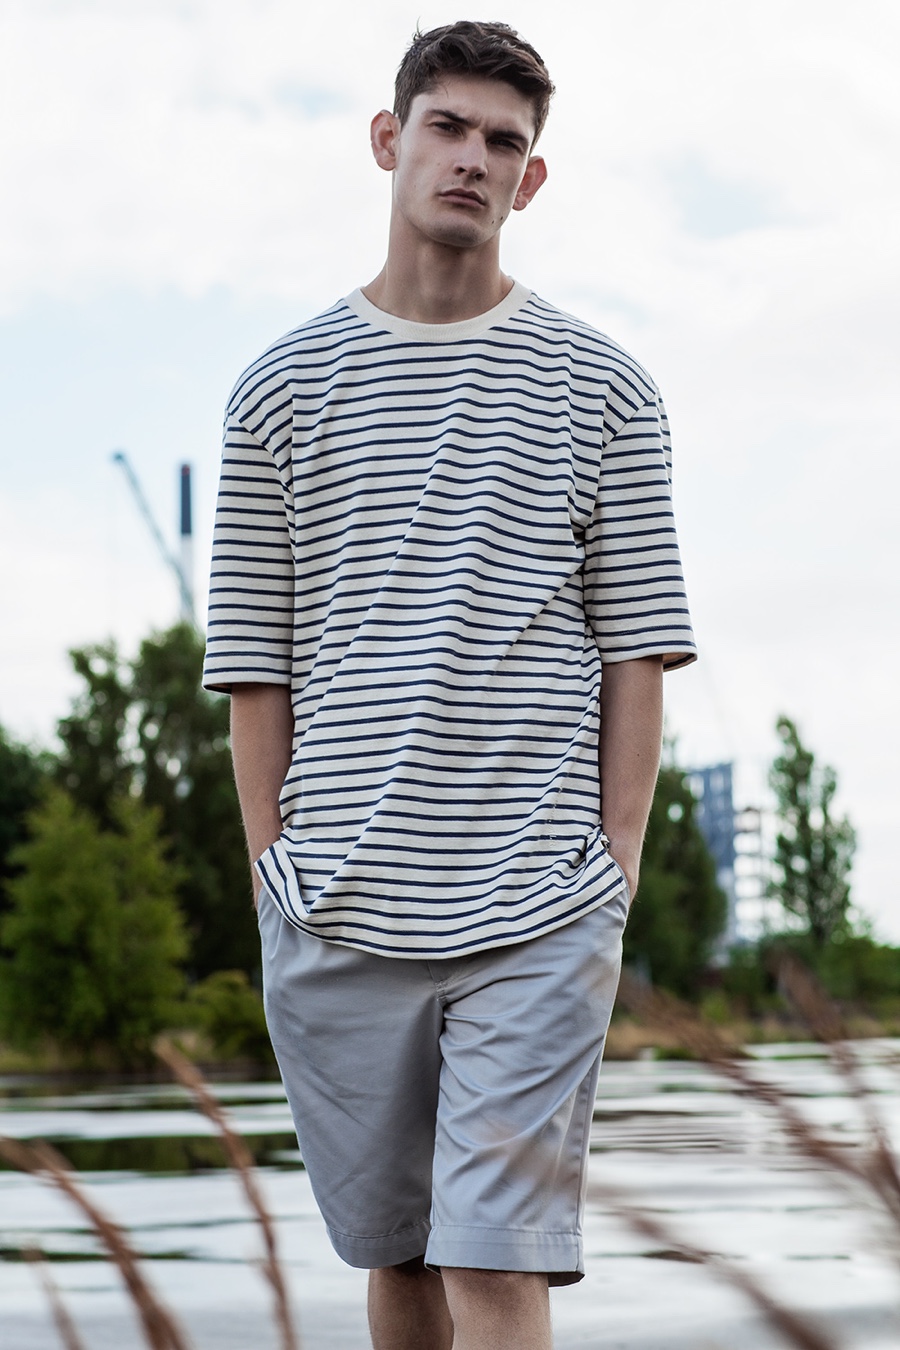 Reece Sanders Goes Casual for BRAND8 Spring/Summer 2016 – Page 2